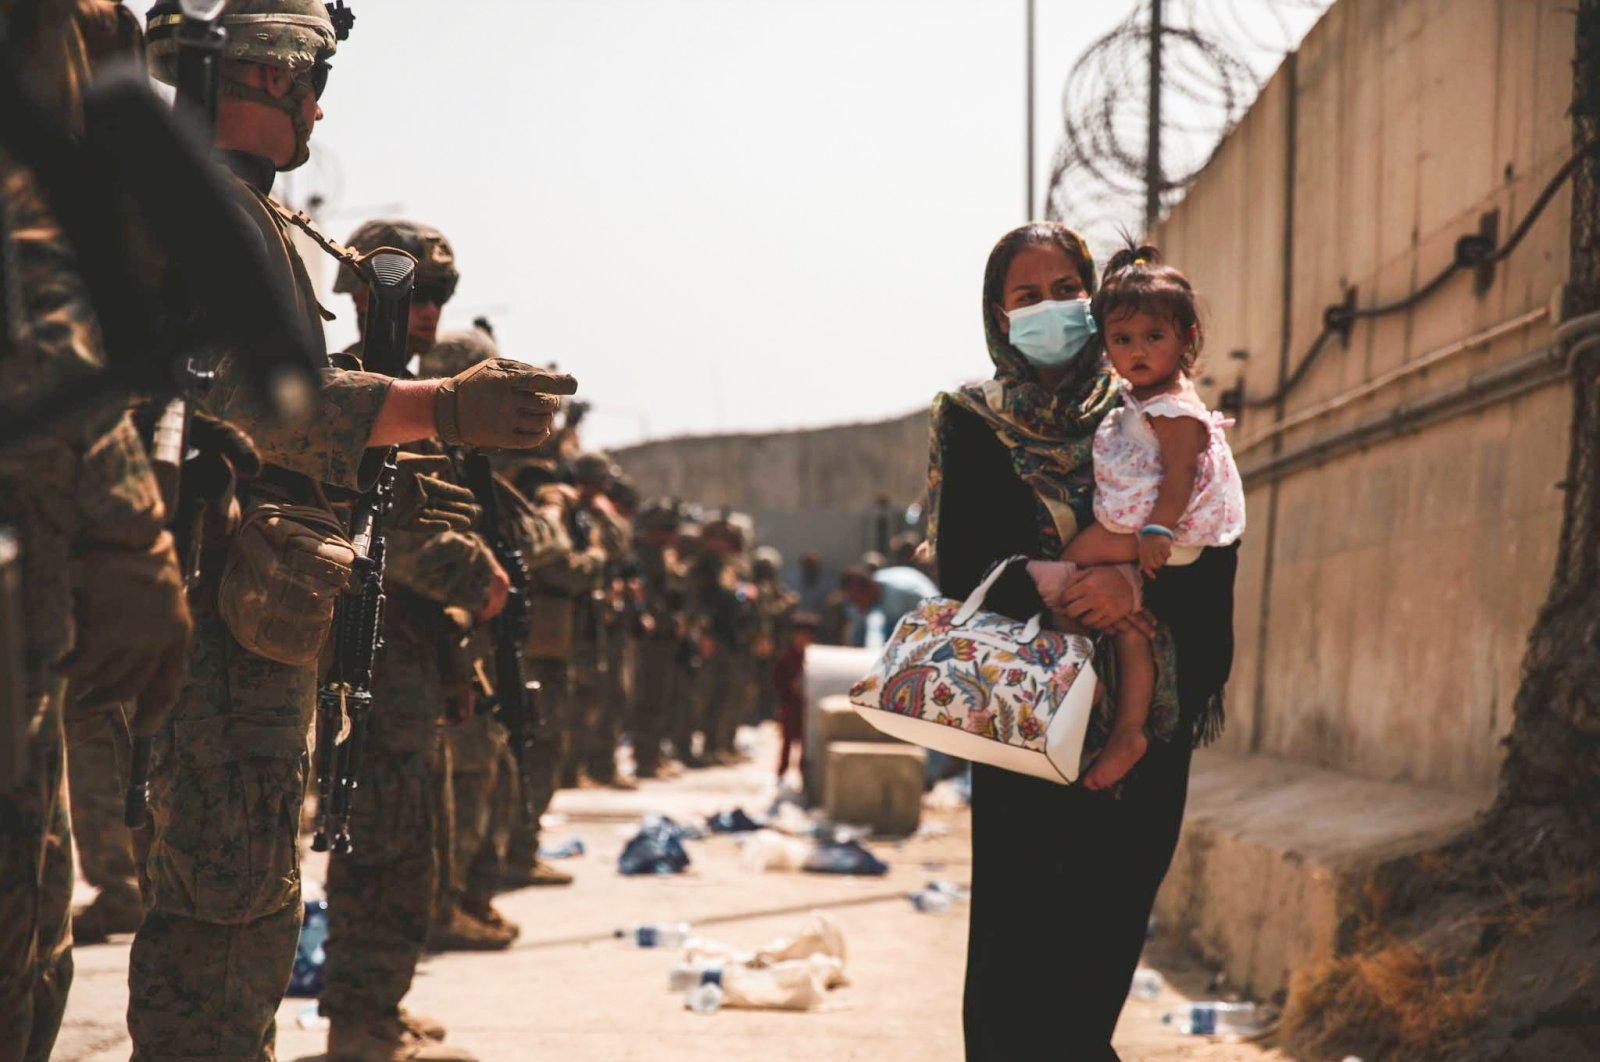 A U.S. Marine assigned to 24th Marine Expeditionary Unit guides an evacuee during an evacuation at Hamid Karzai International Airport, in Kabul, Afghanistan, Aug. 18, 2021. (Reuters Photo)